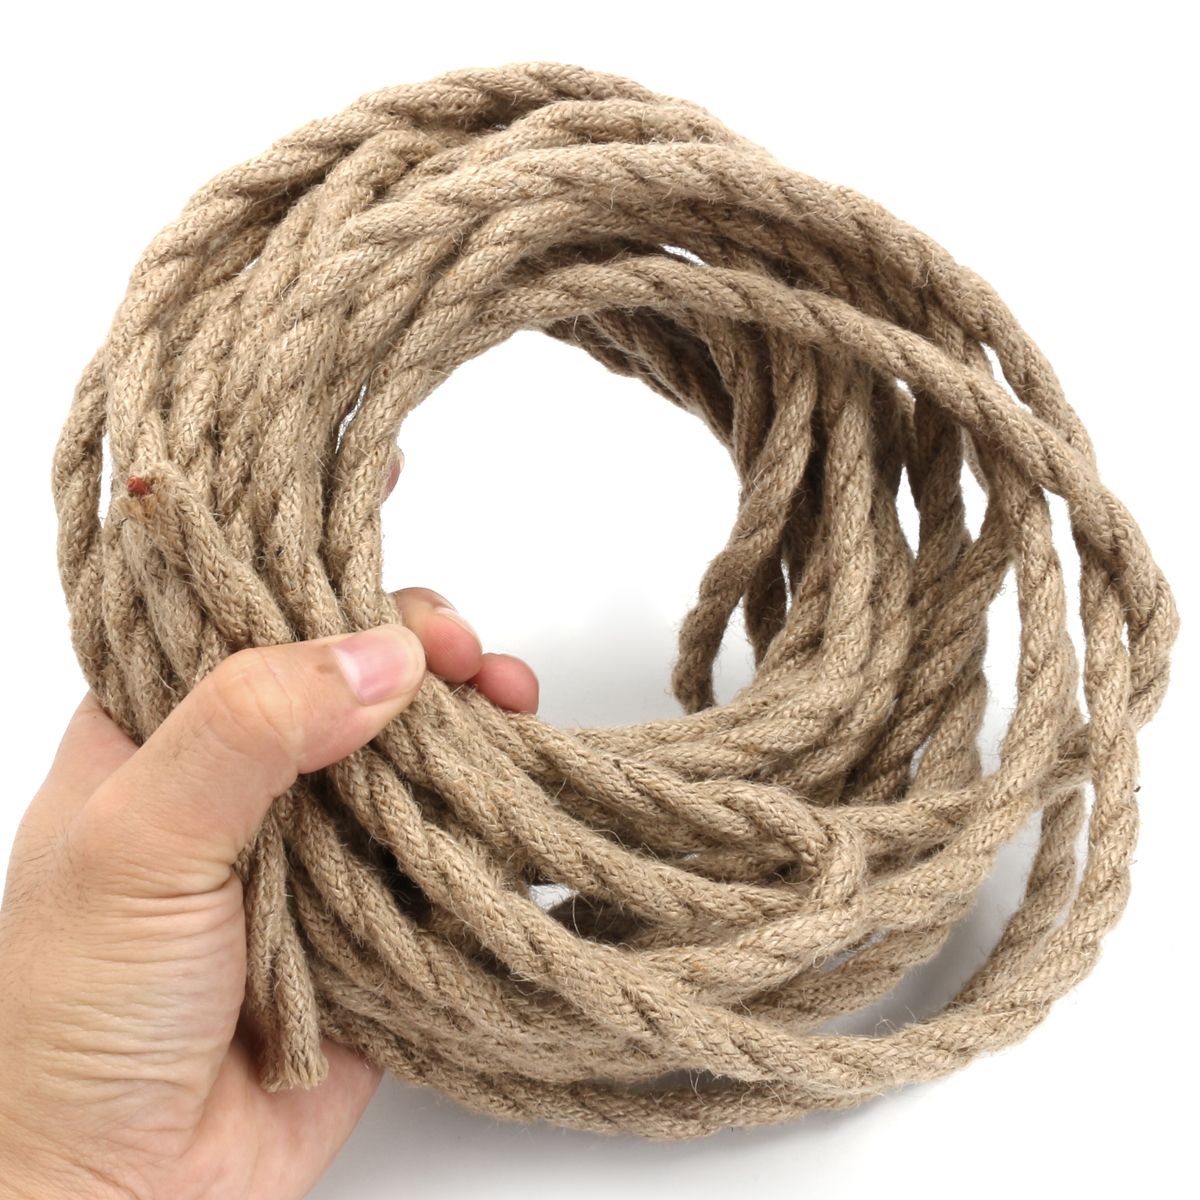 10m-2x075mm-Hemp-Rope-Power-Cable-Wire-Wire-Braided-Fabric-Twisted-1173222